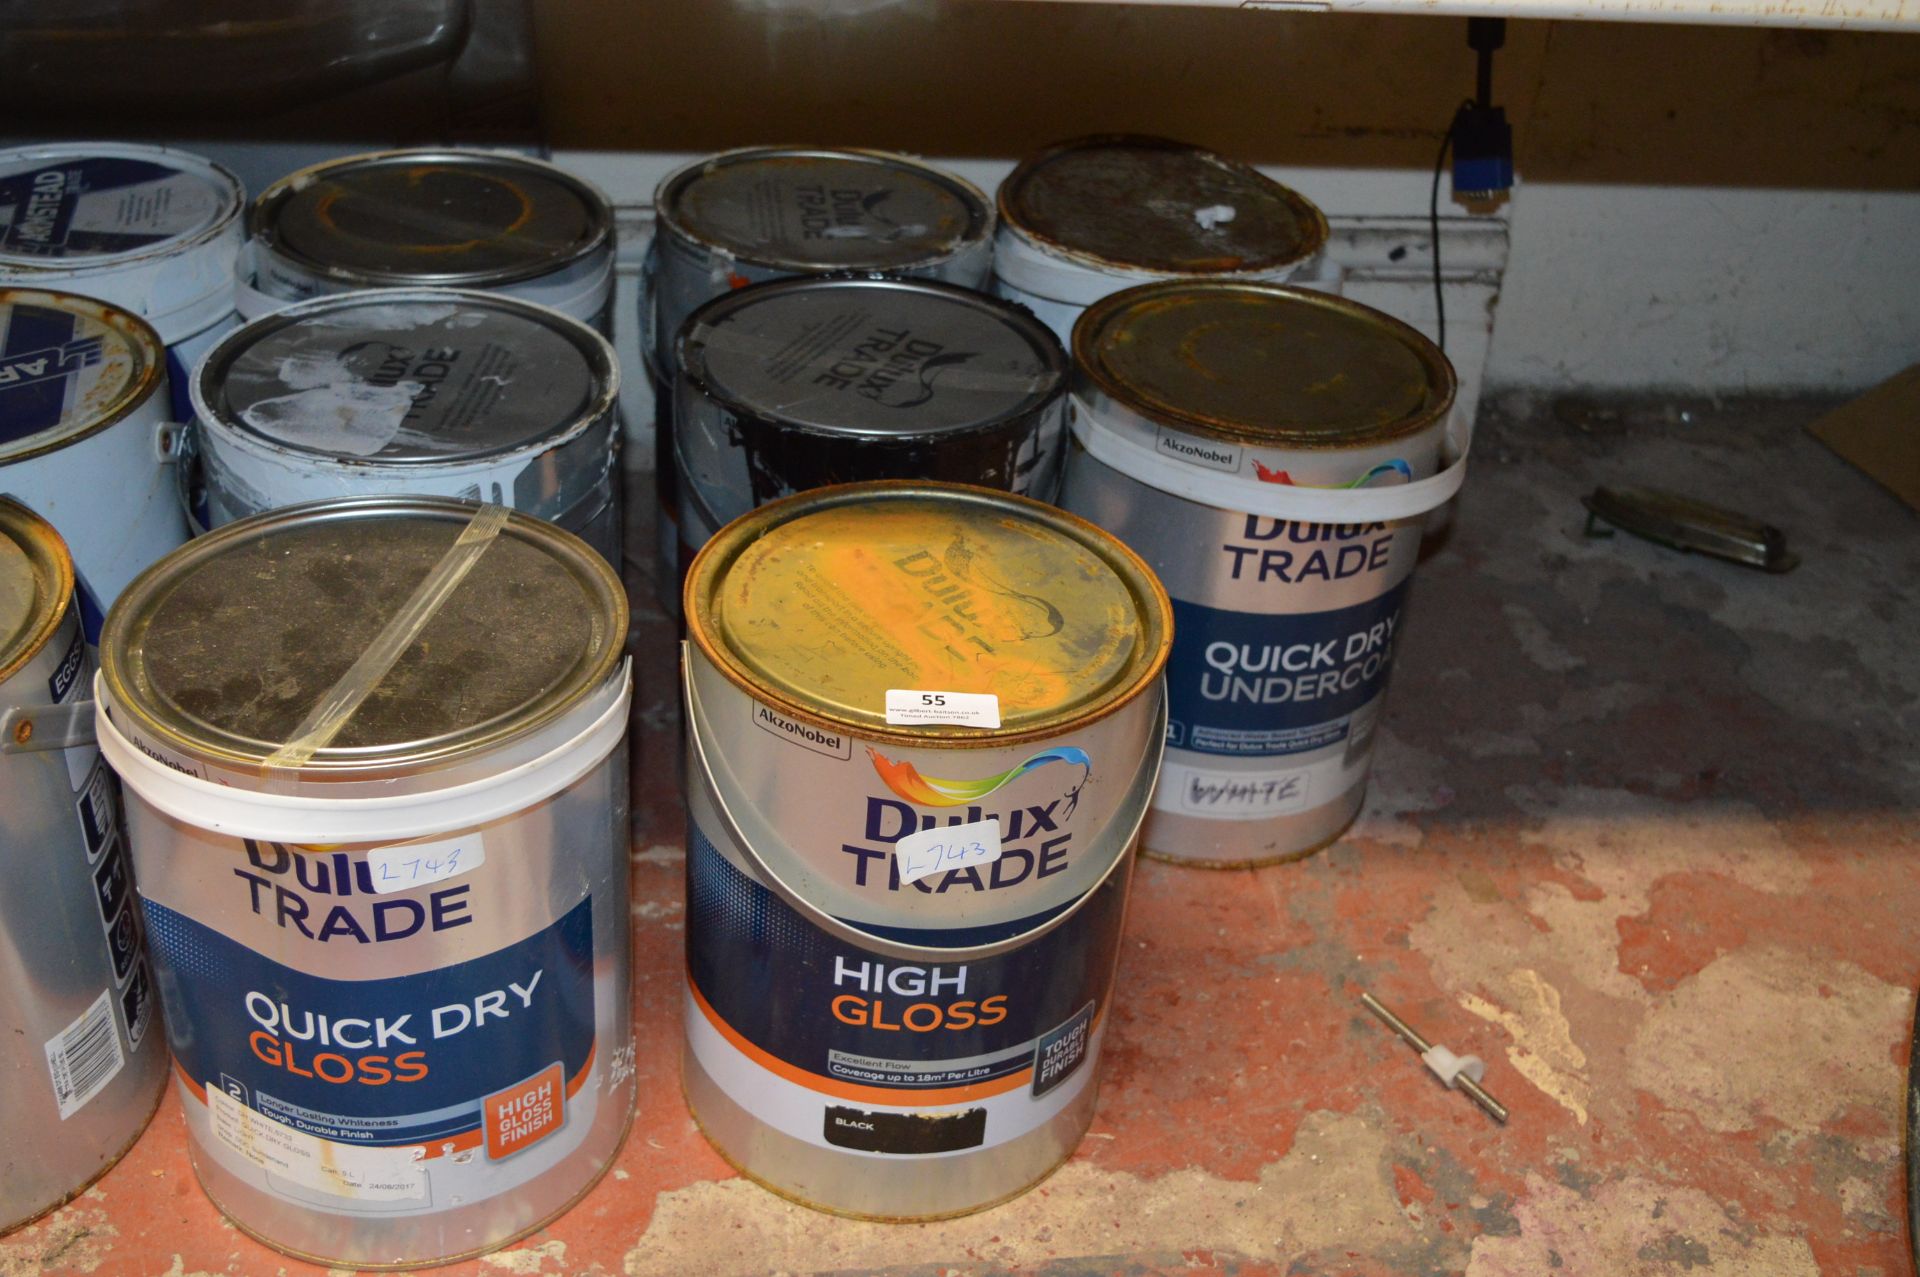 6x5L of Dulux Trade Quick Drying Gloss and 2x5L of Dulux Trade Undercoat